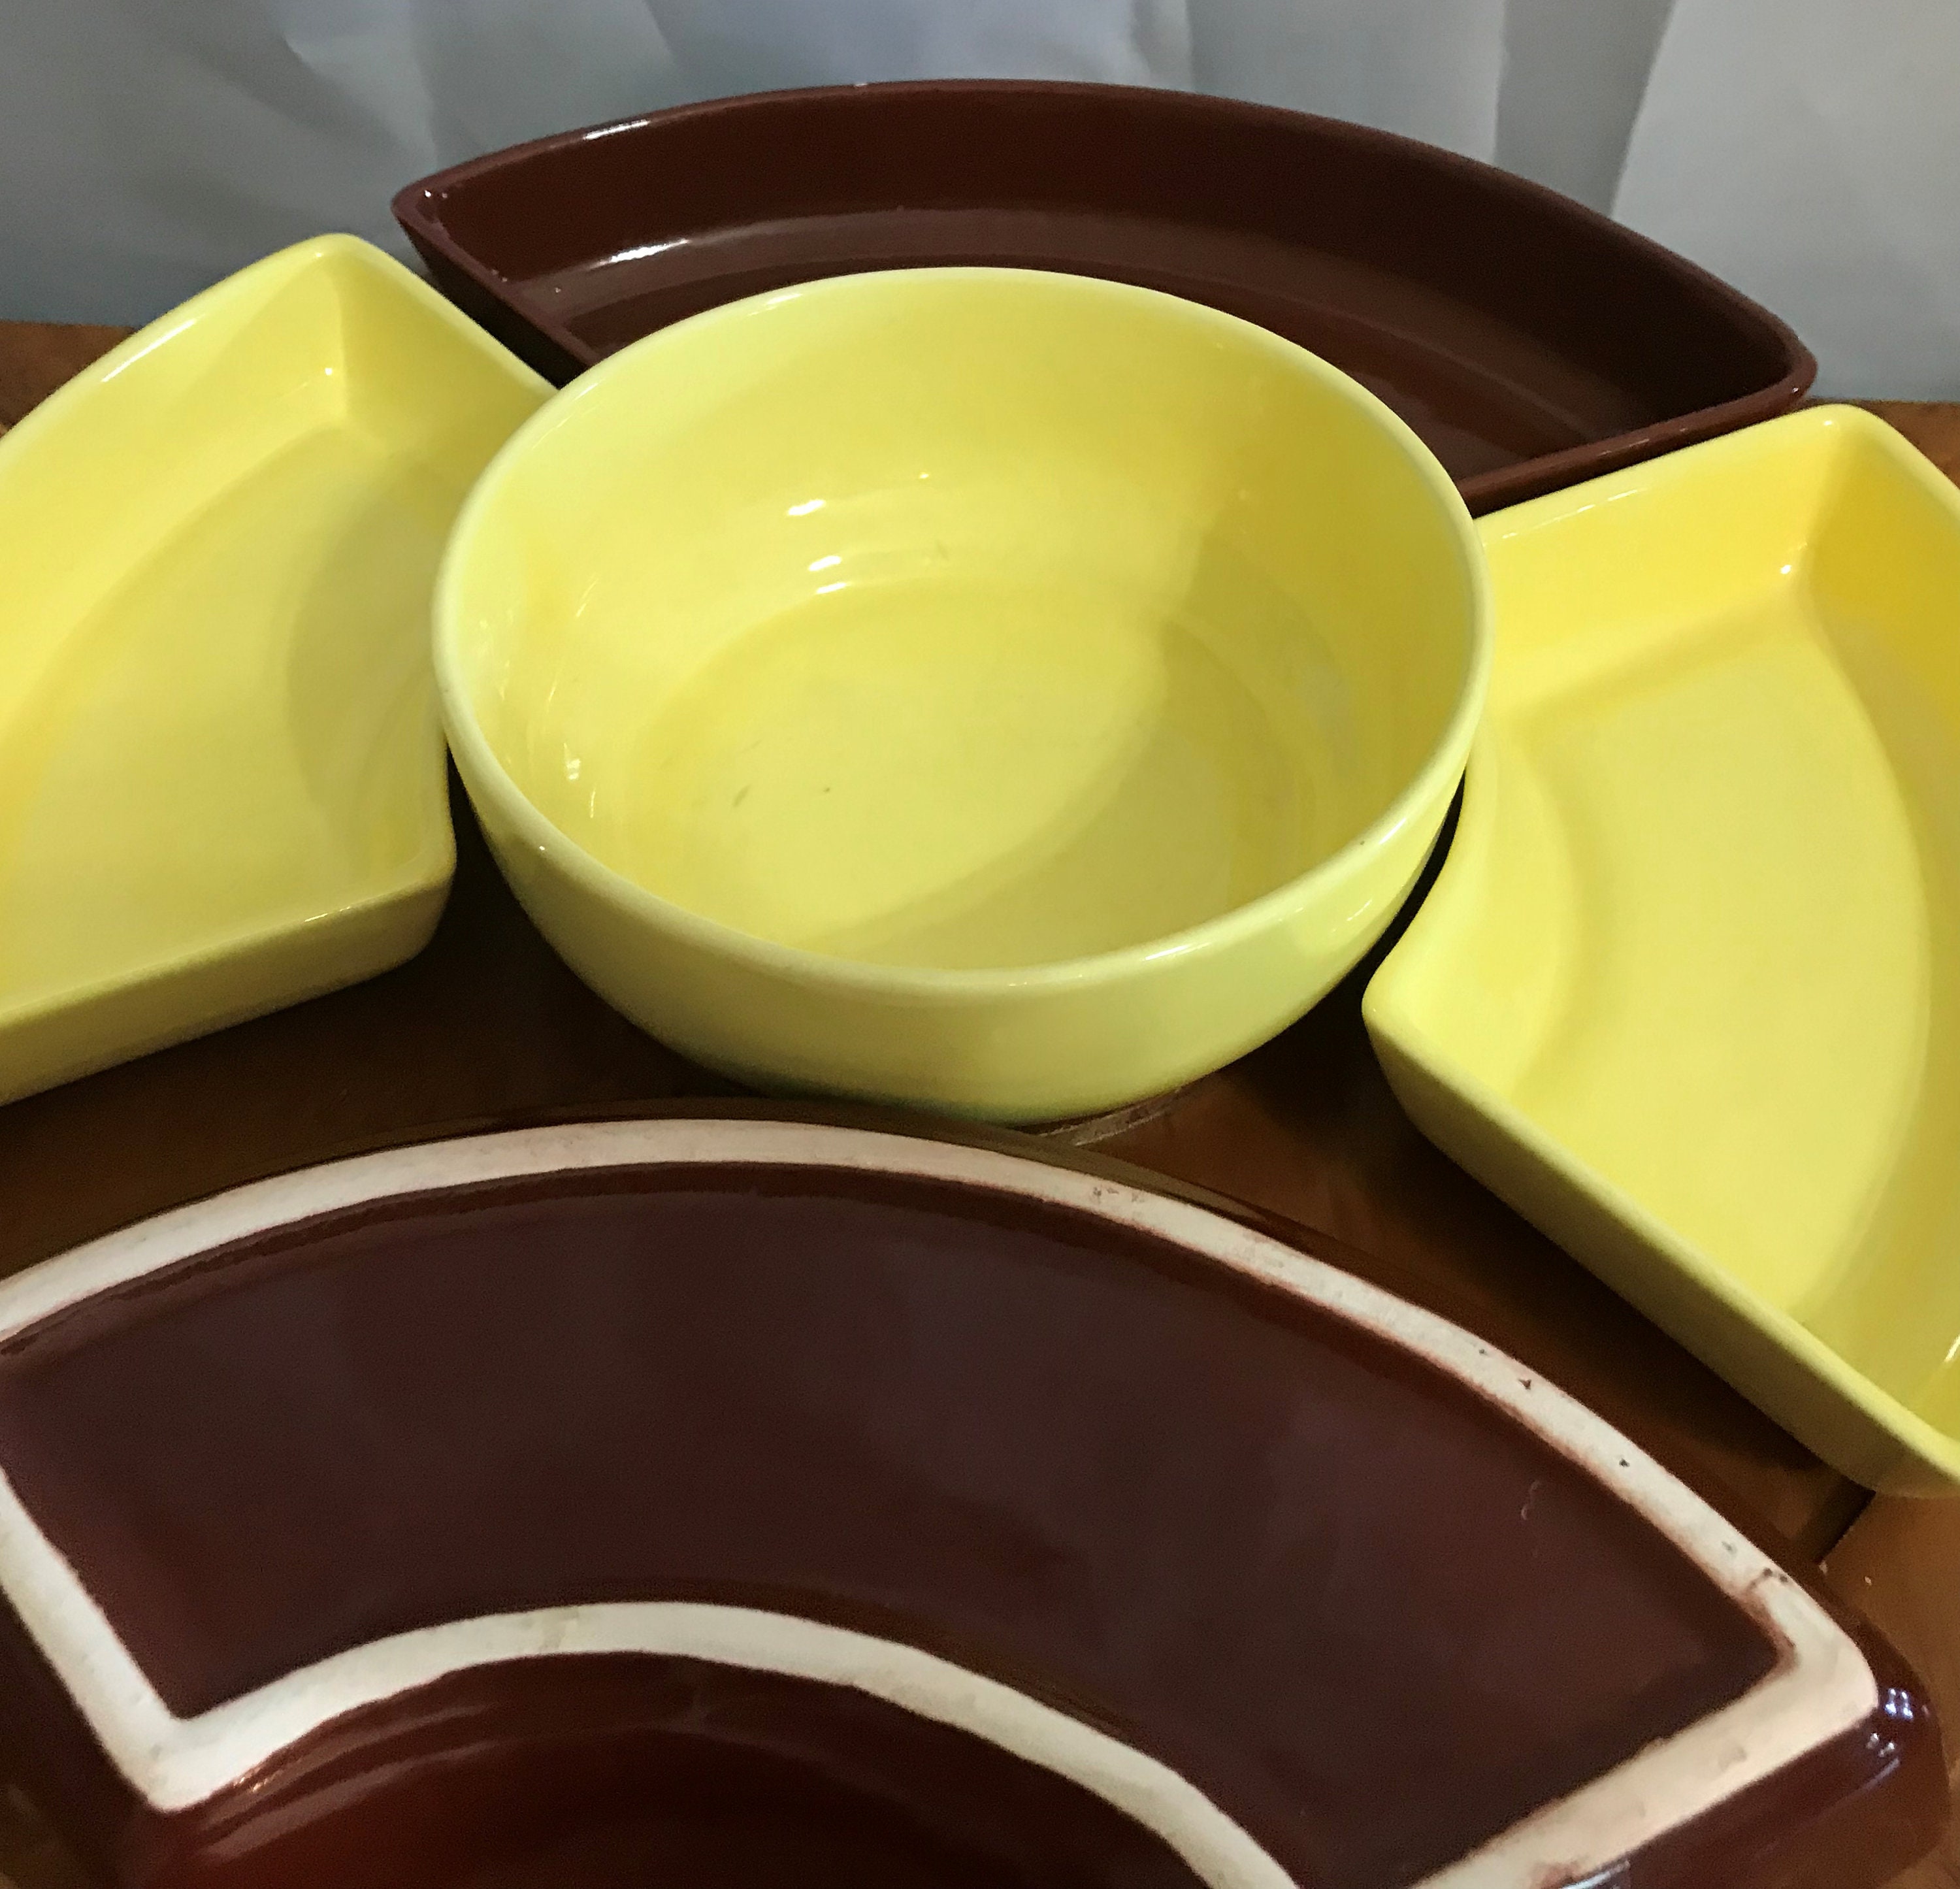 Mid Century, Lazy Susan Set, USA Pottery, Brown Yellow Mustard, Glazed  Pottery, Turntable Included, Vintage, Chip and Dip Set, Party Serving 